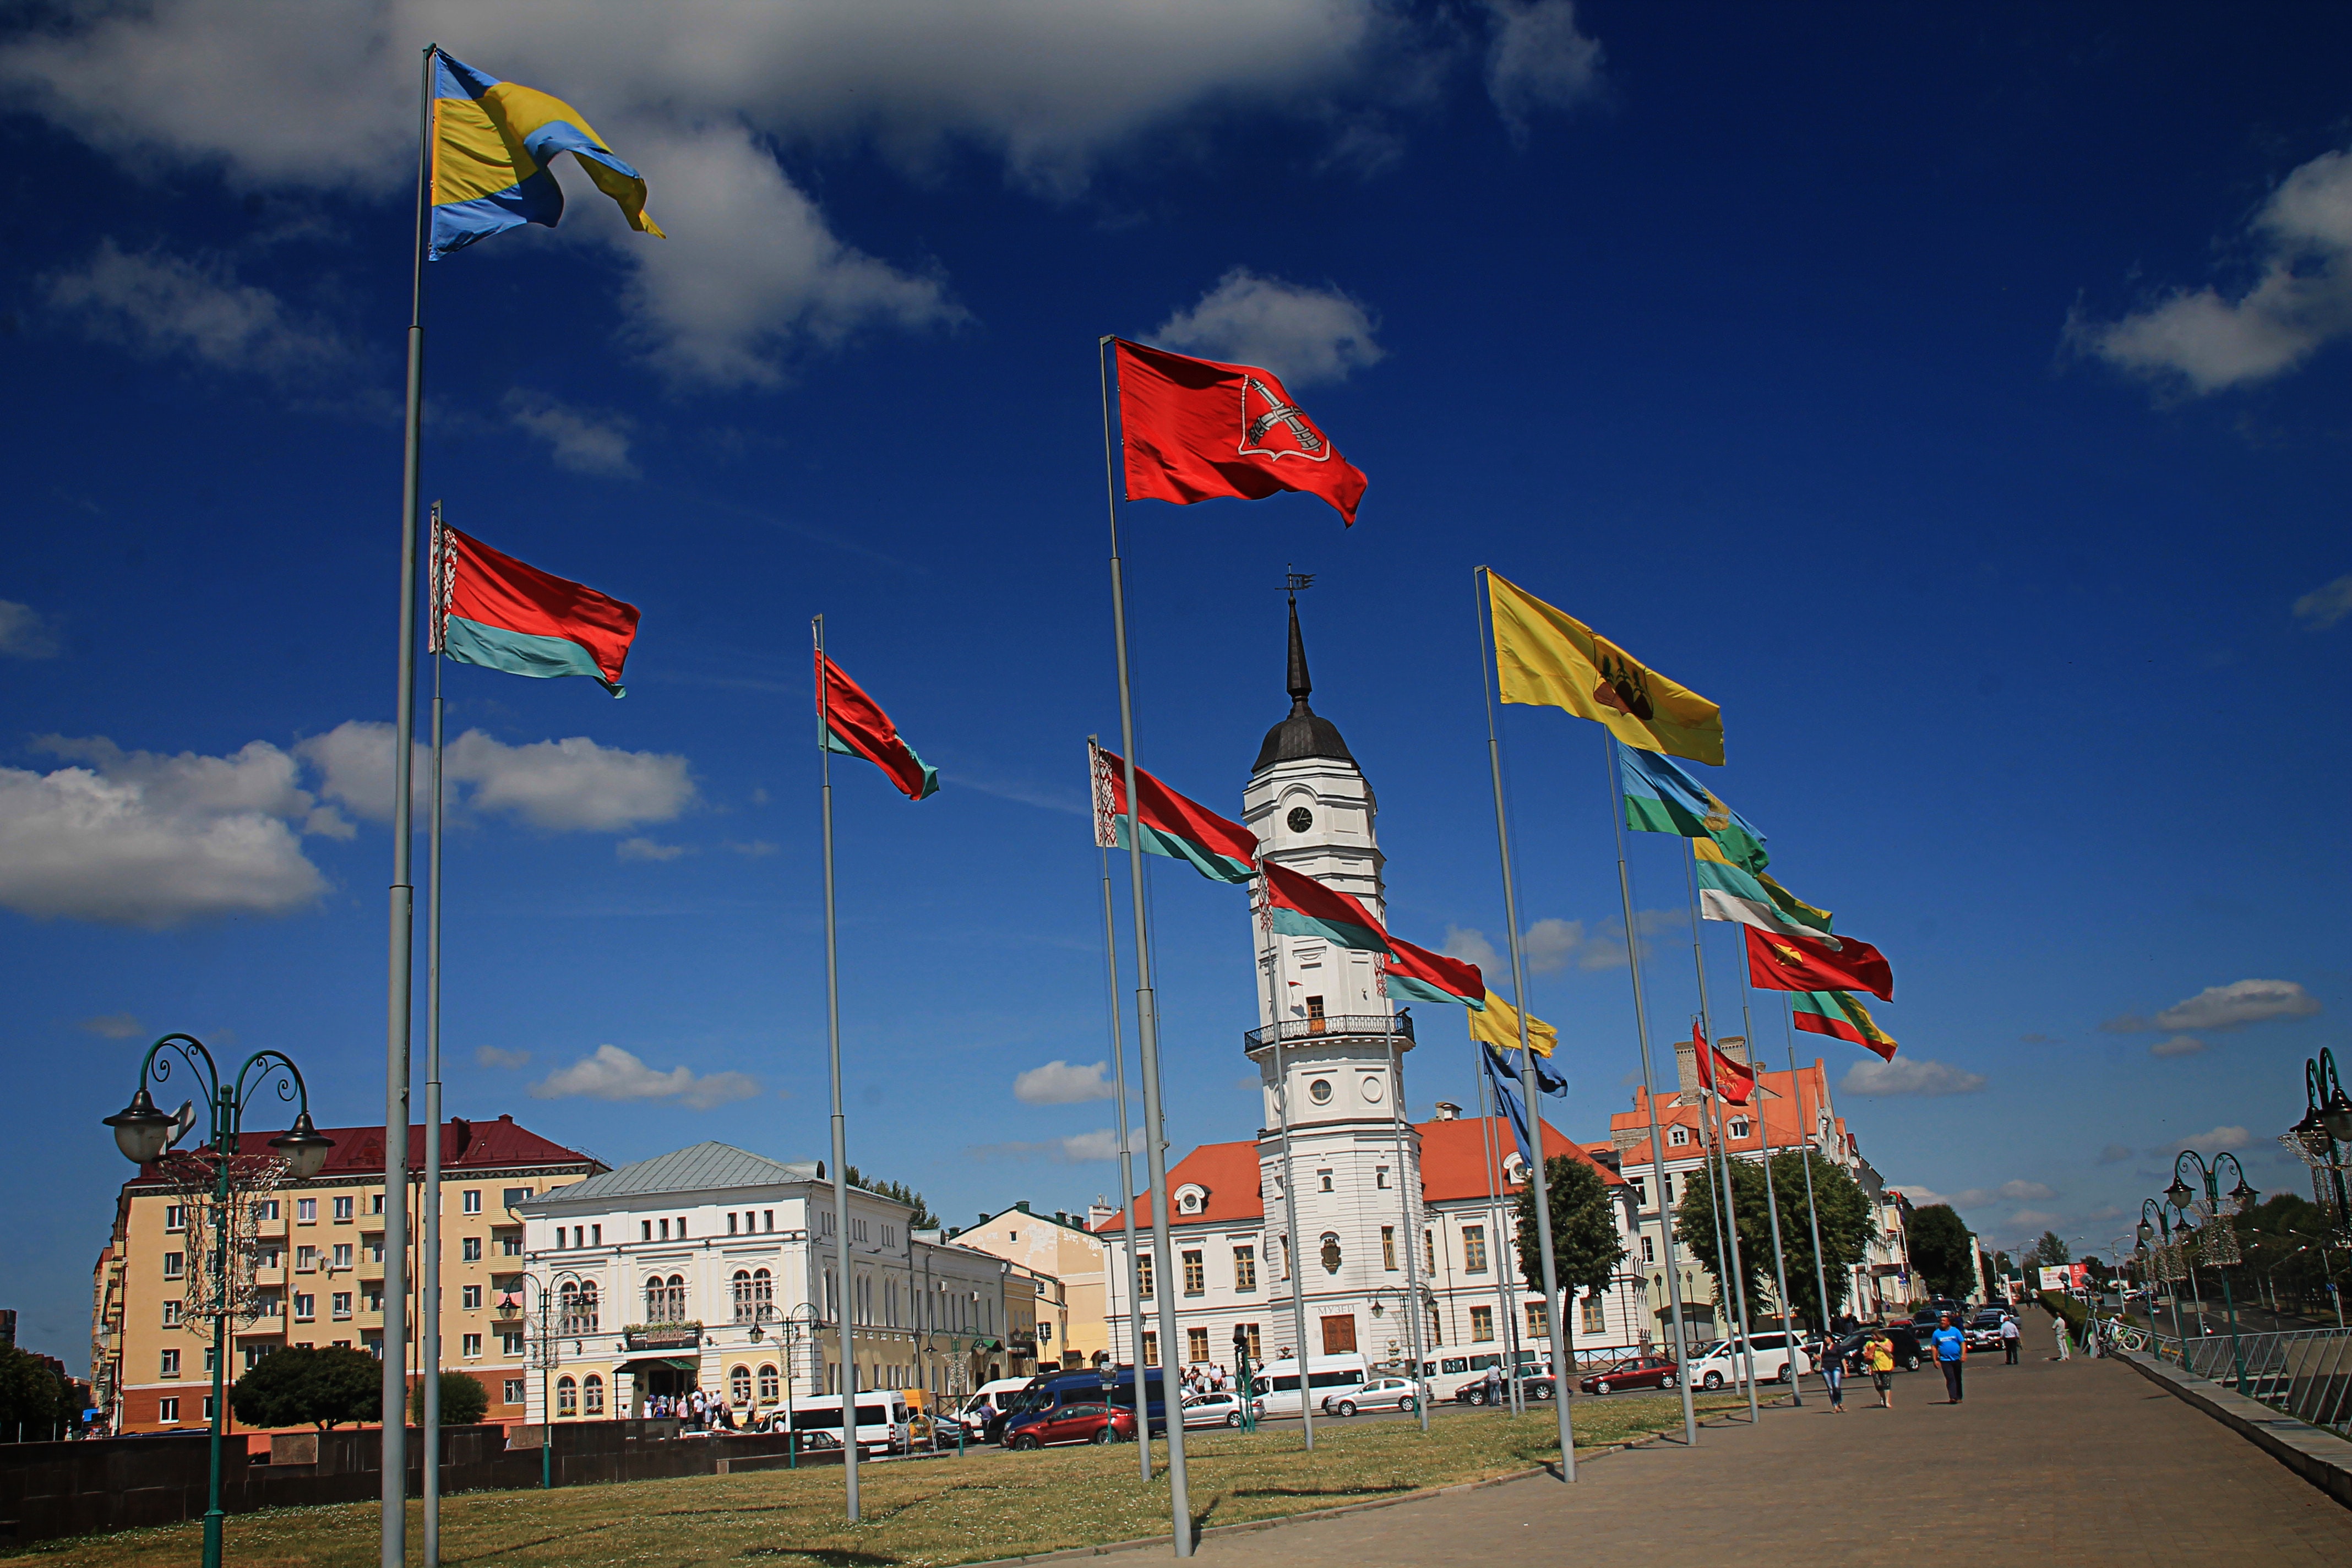 Different flags waving on poles at daytime photo